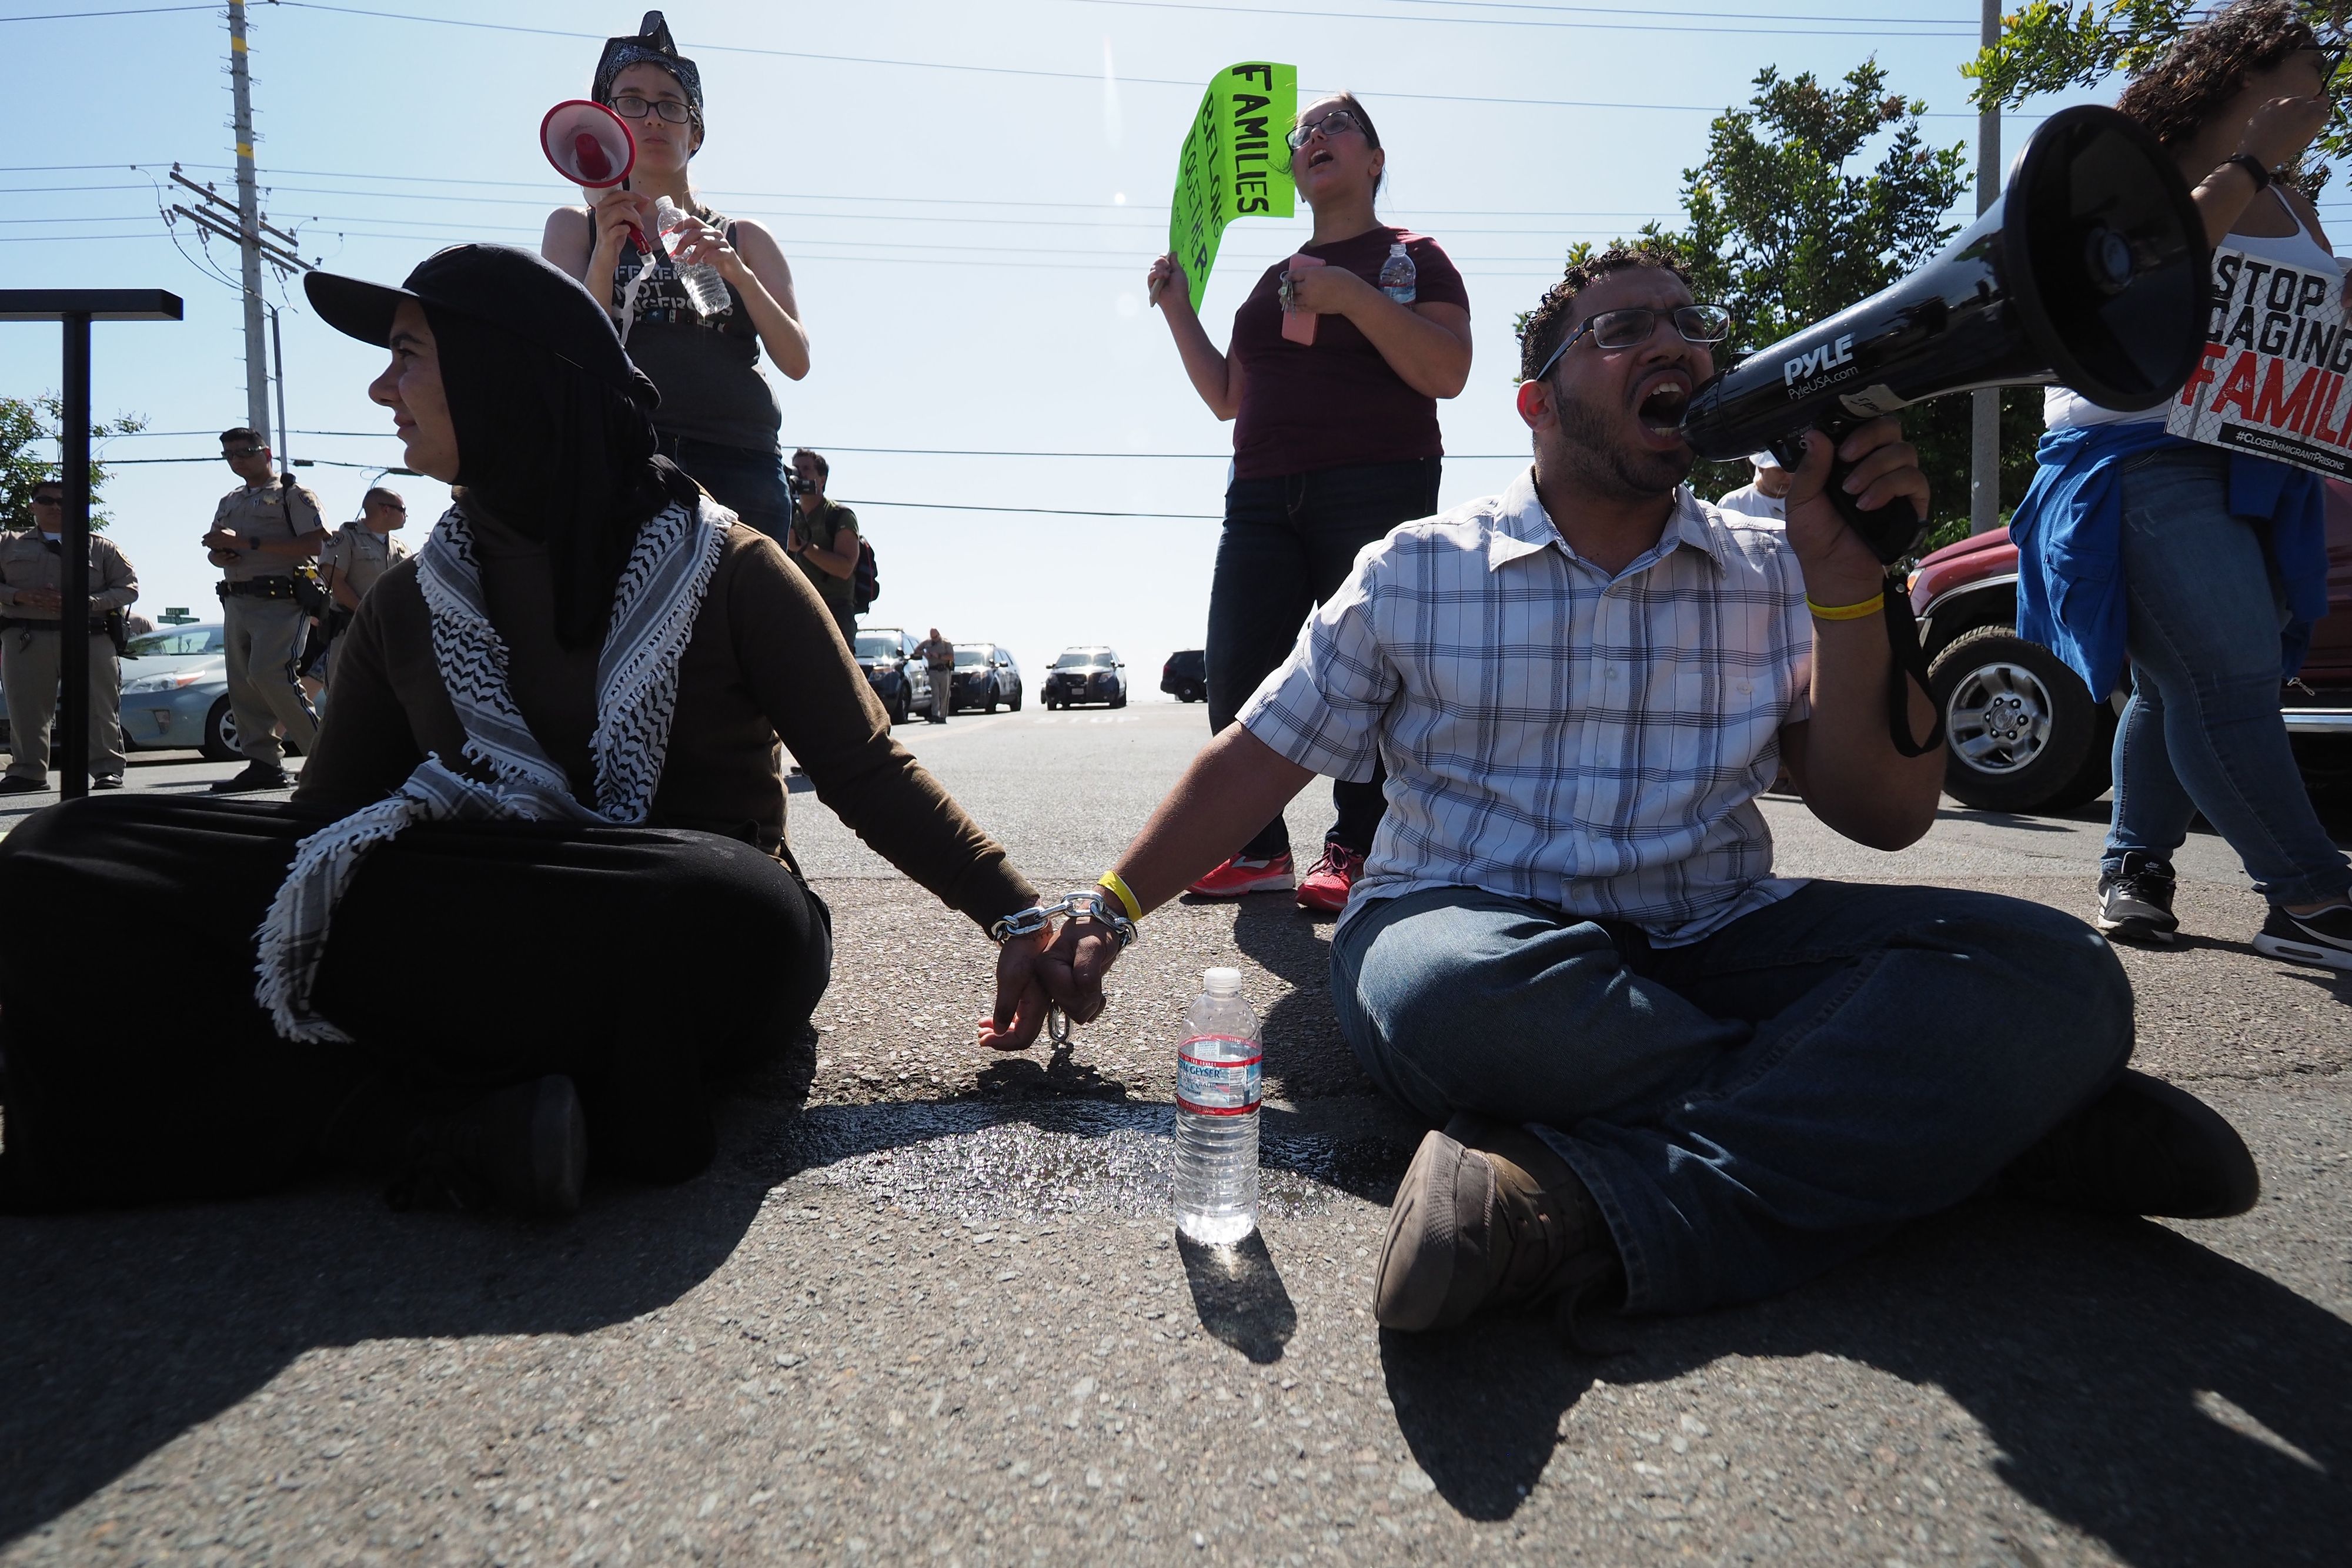 Protestors chained together at the wrist block traffic from passing on the road to the Otay Mesa Detention Center during a demonstration against US immigration policy that separates children from parents, in San Diego, California June 23, 2018. ROBYN BECK/AFP/Getty Images